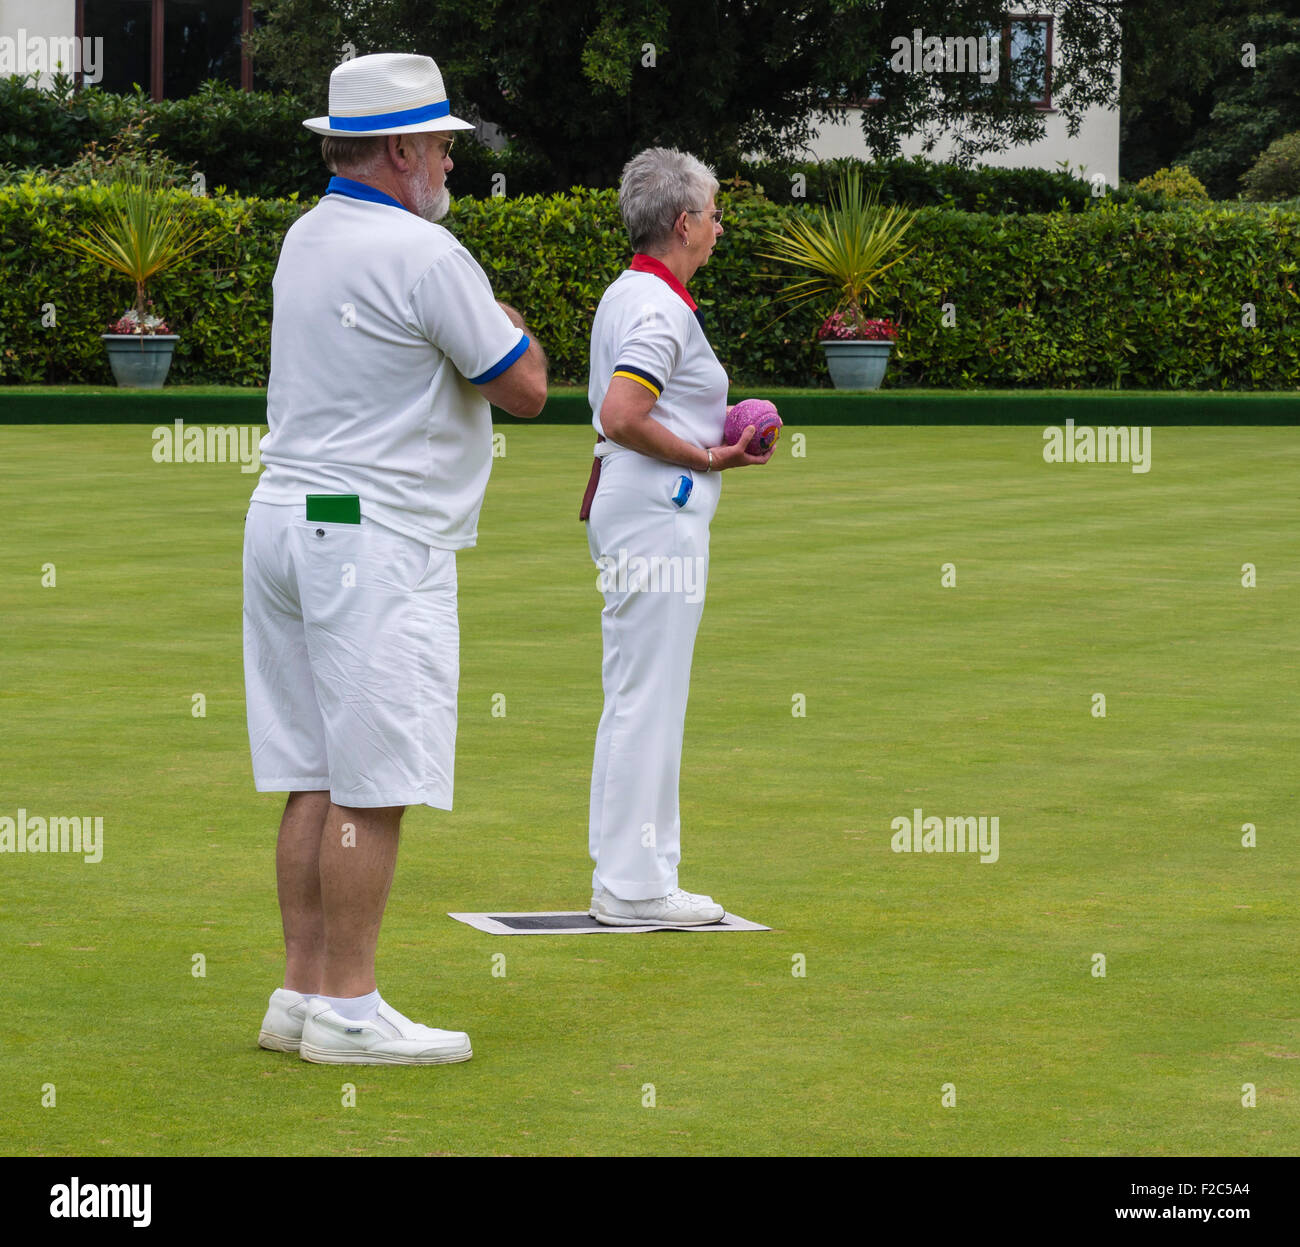 People playing Bowls at the Argyll Bowling Club, Westbourne, Bournemouth, Dorset, England, UK Stock Photo